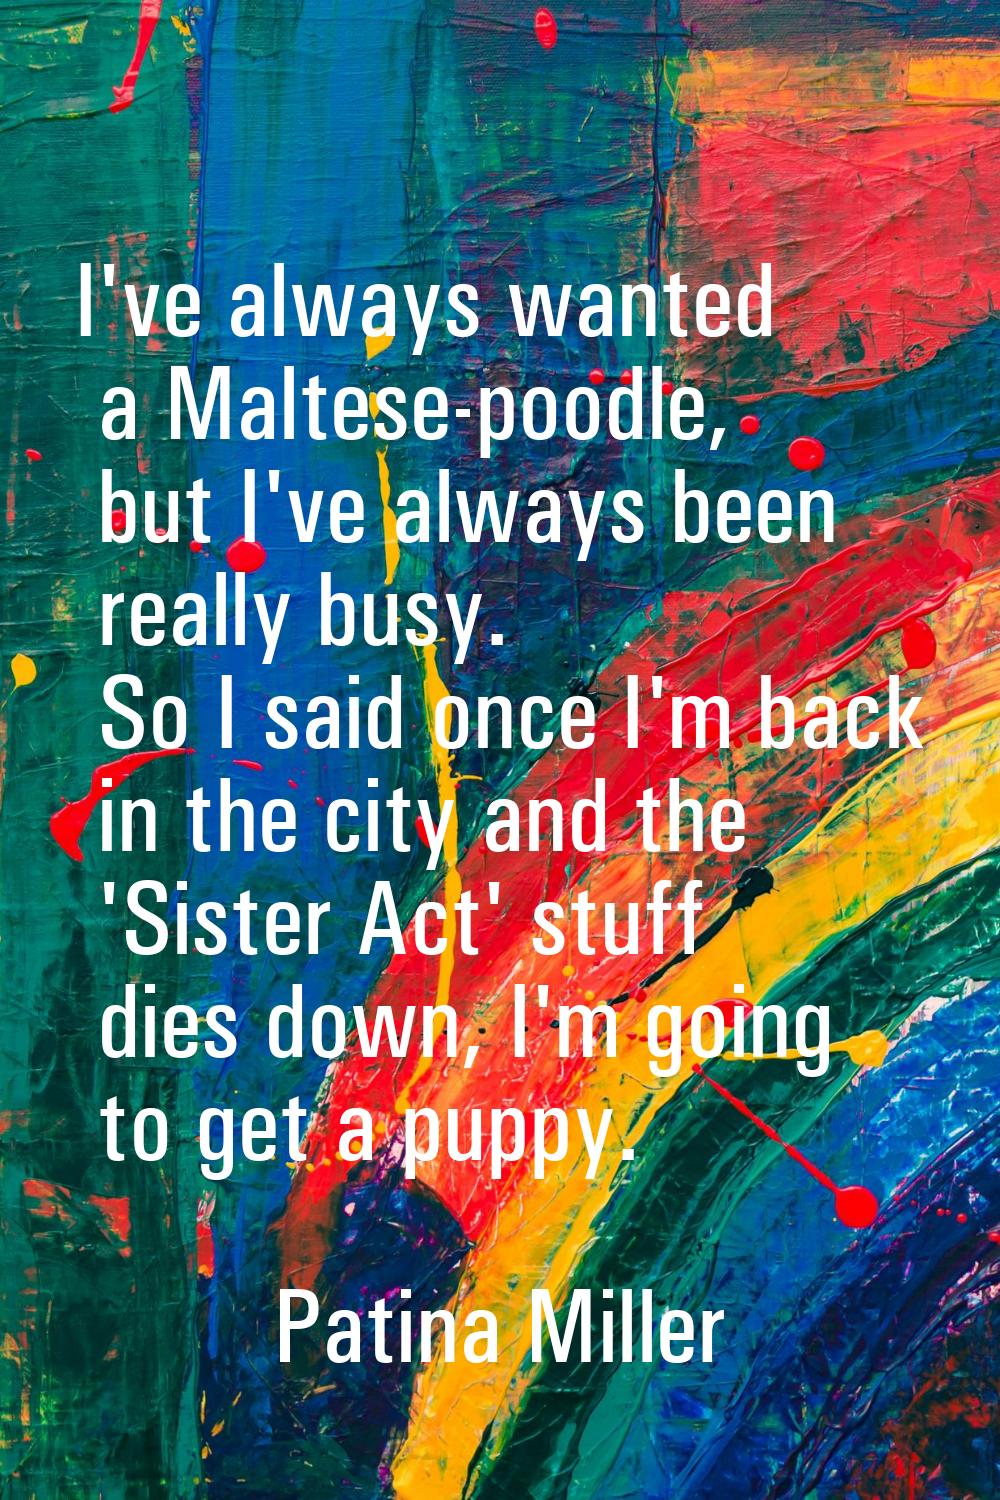 I've always wanted a Maltese-poodle, but I've always been really busy. So I said once I'm back in t